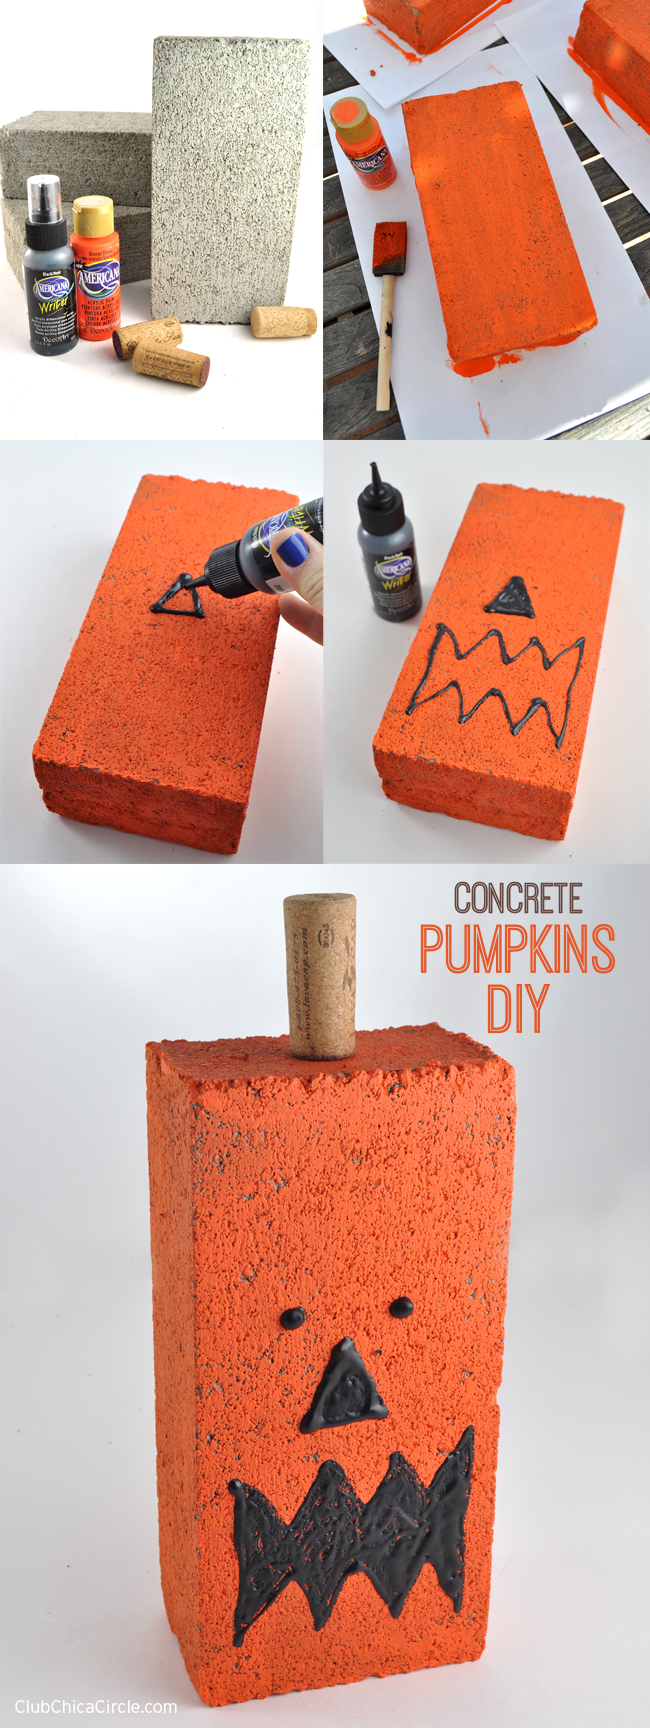 painting concrete bricks and turning them into pumpkins